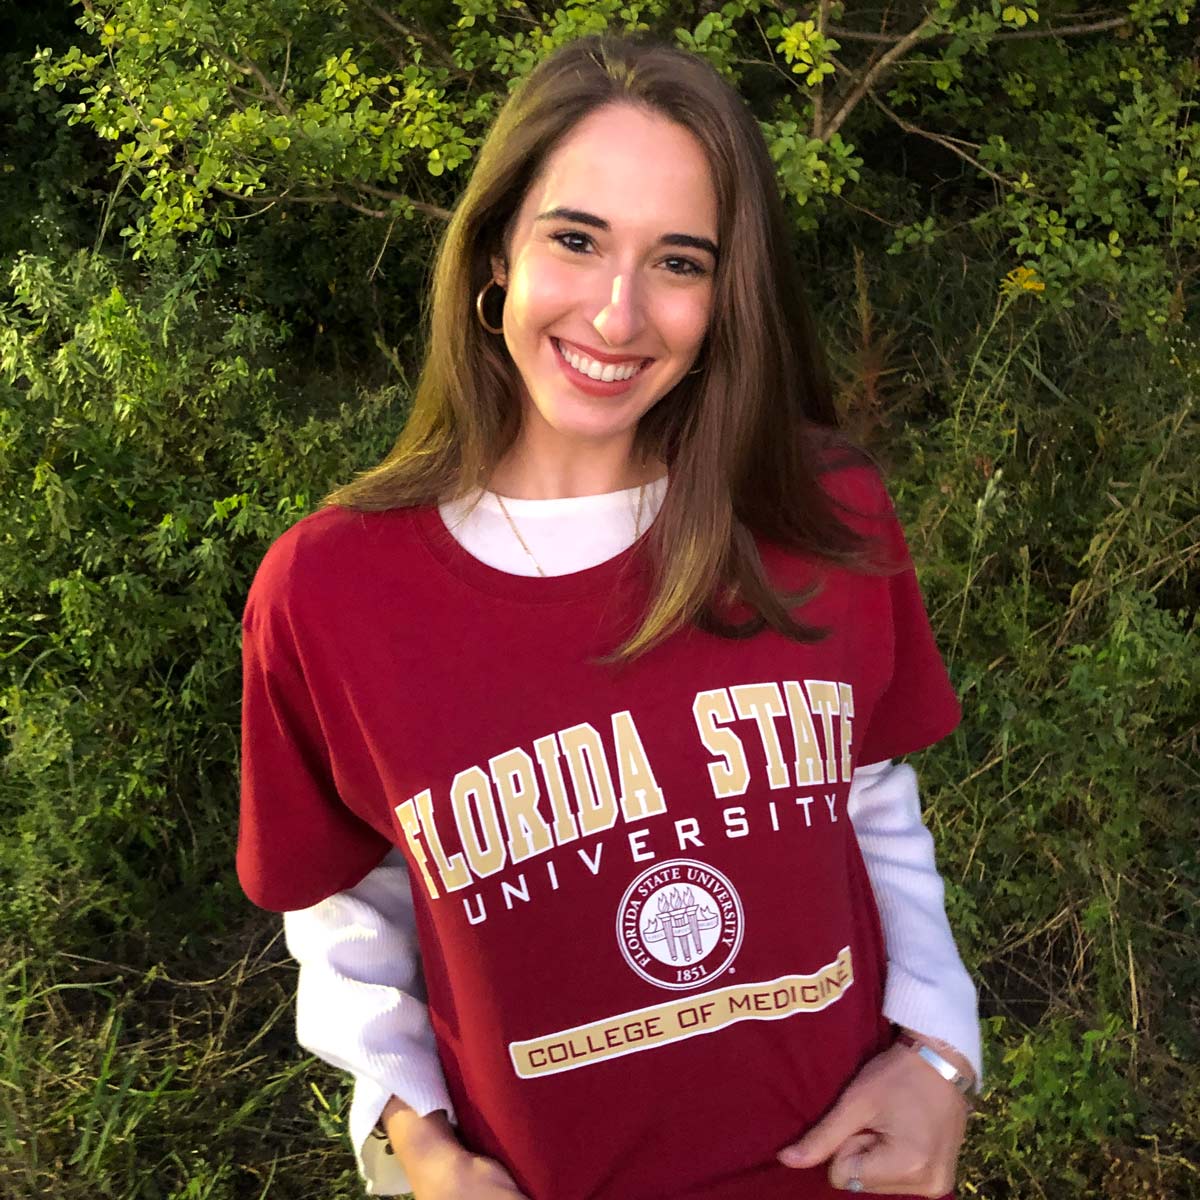 Catherine Maige wearing a Florida State t-shirt.